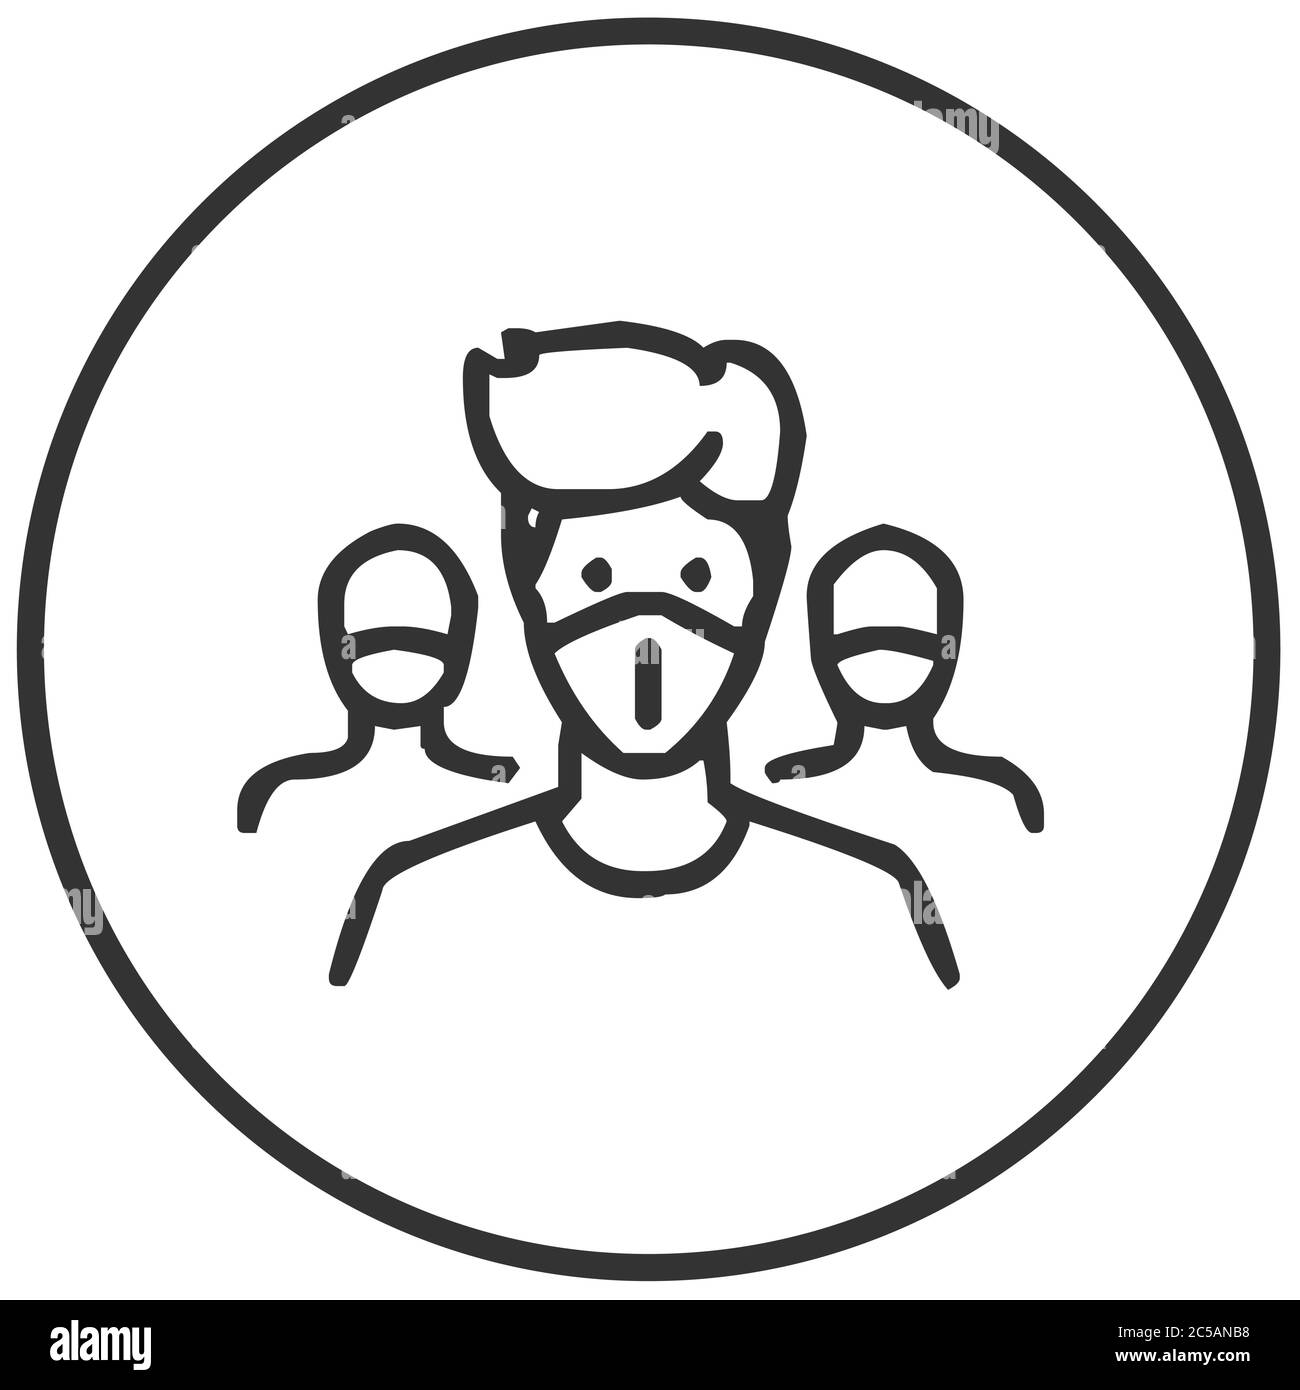 Wear mask in groups icon vector illustration Stock Vector